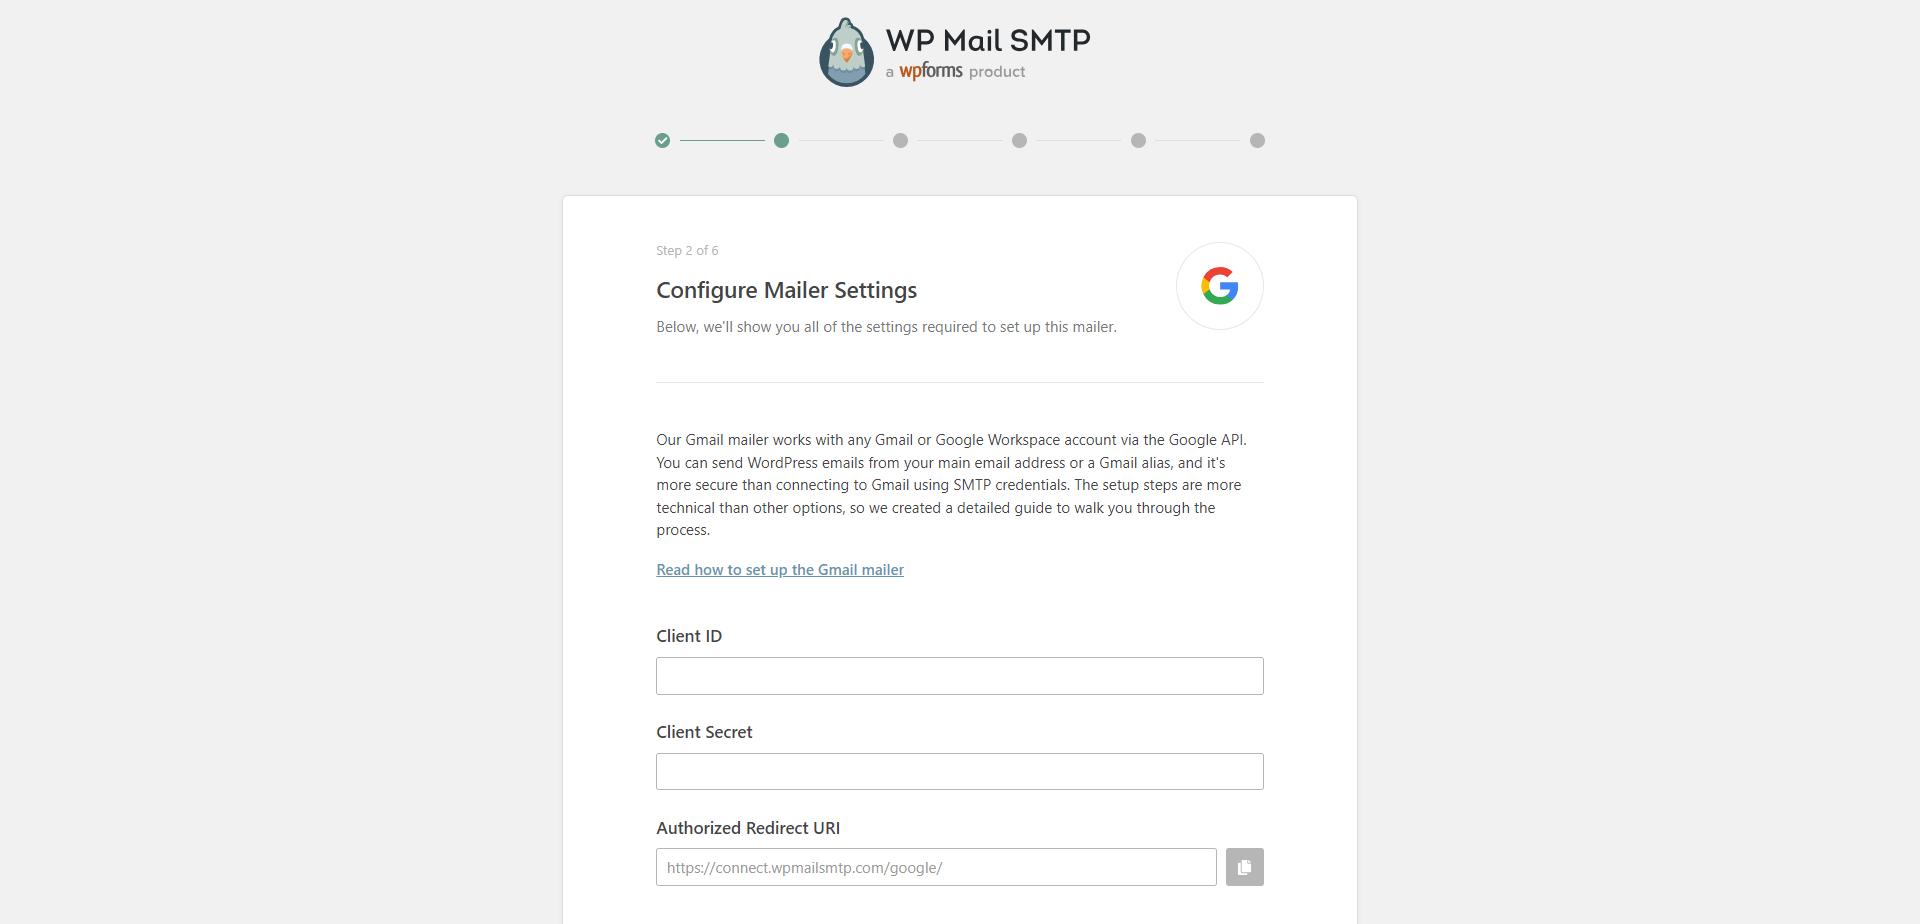 Configuring the SMTP Mailer